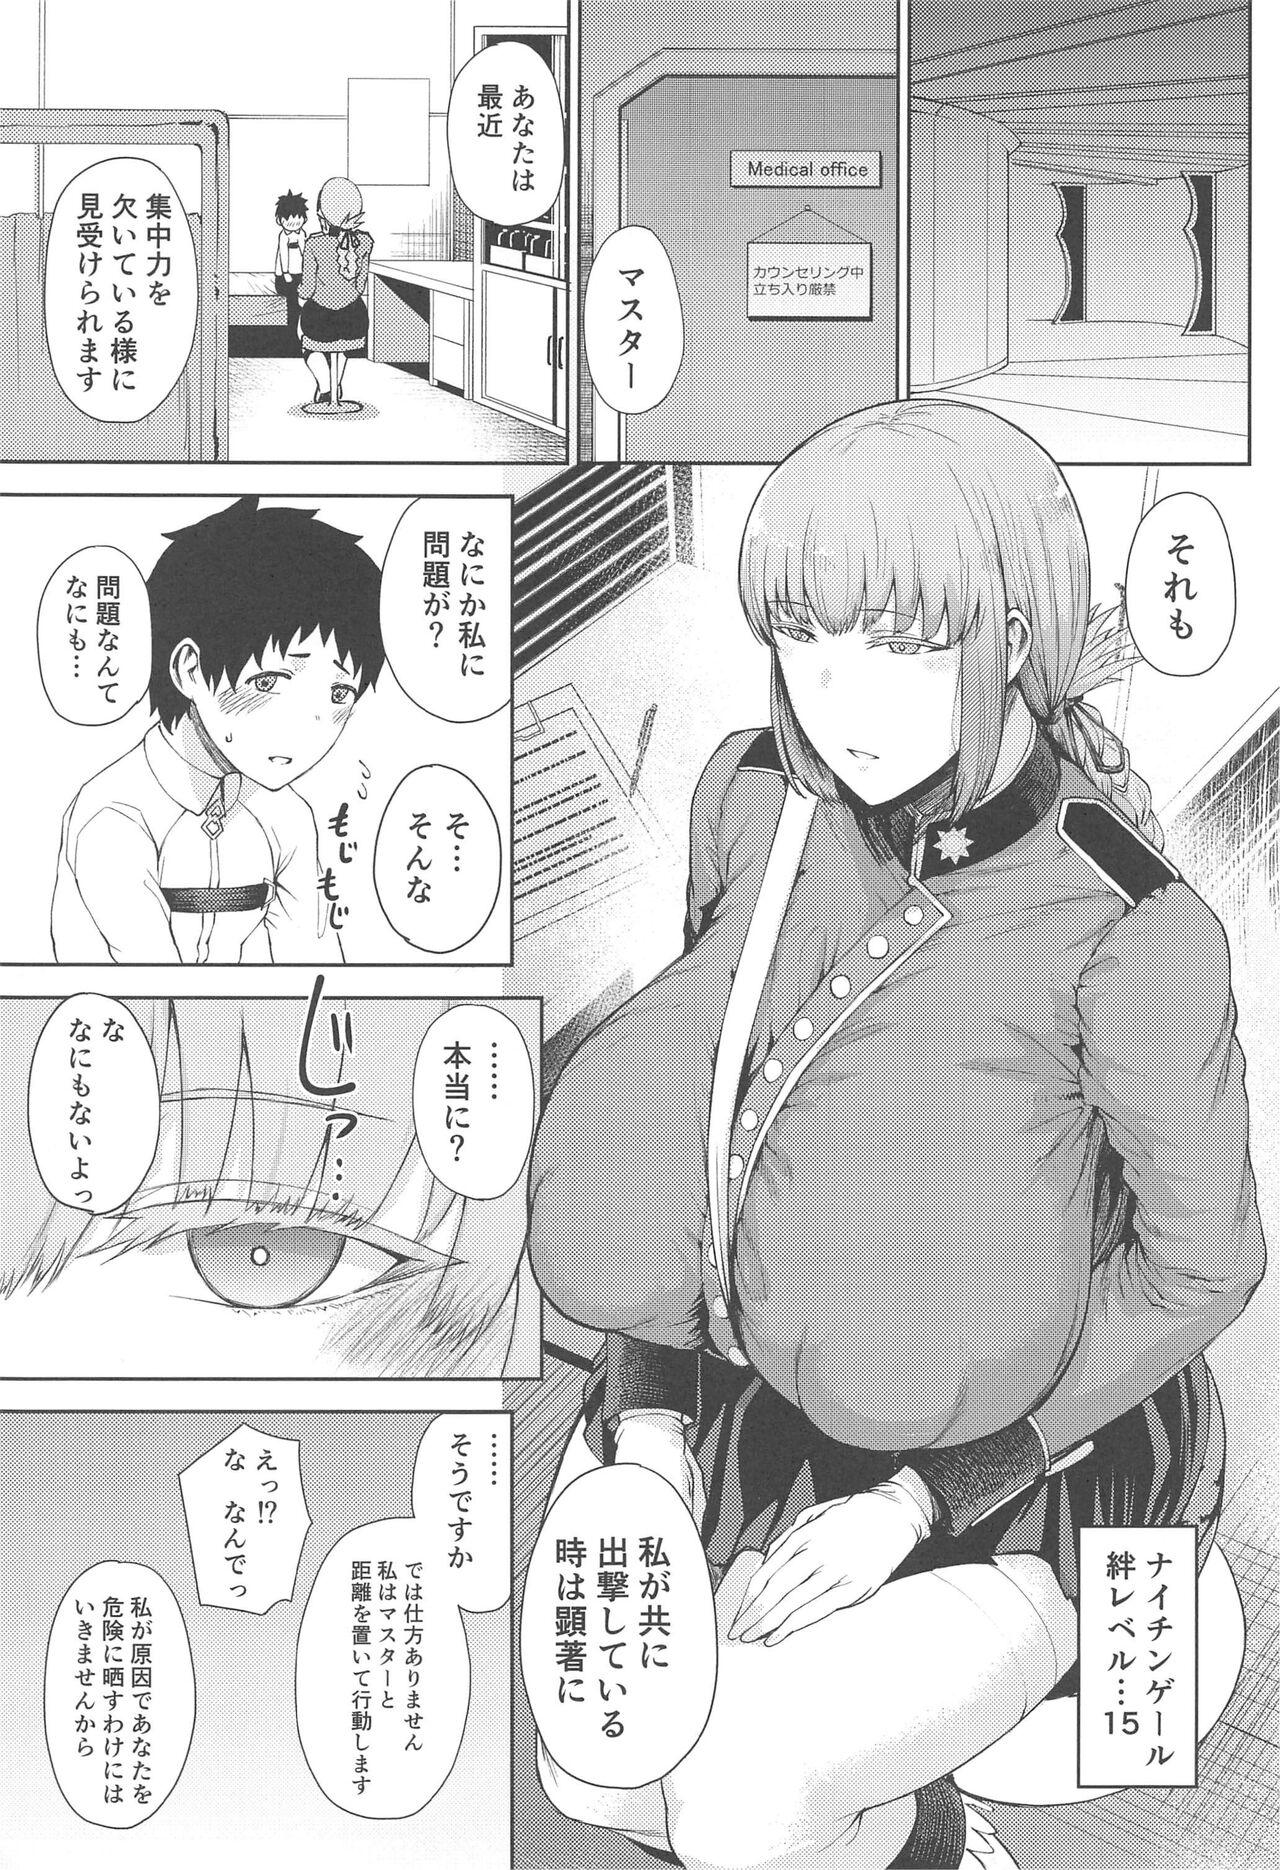 Fuck My Pussy Chiryou desu - Fate grand order Amateur Sex - Page 2